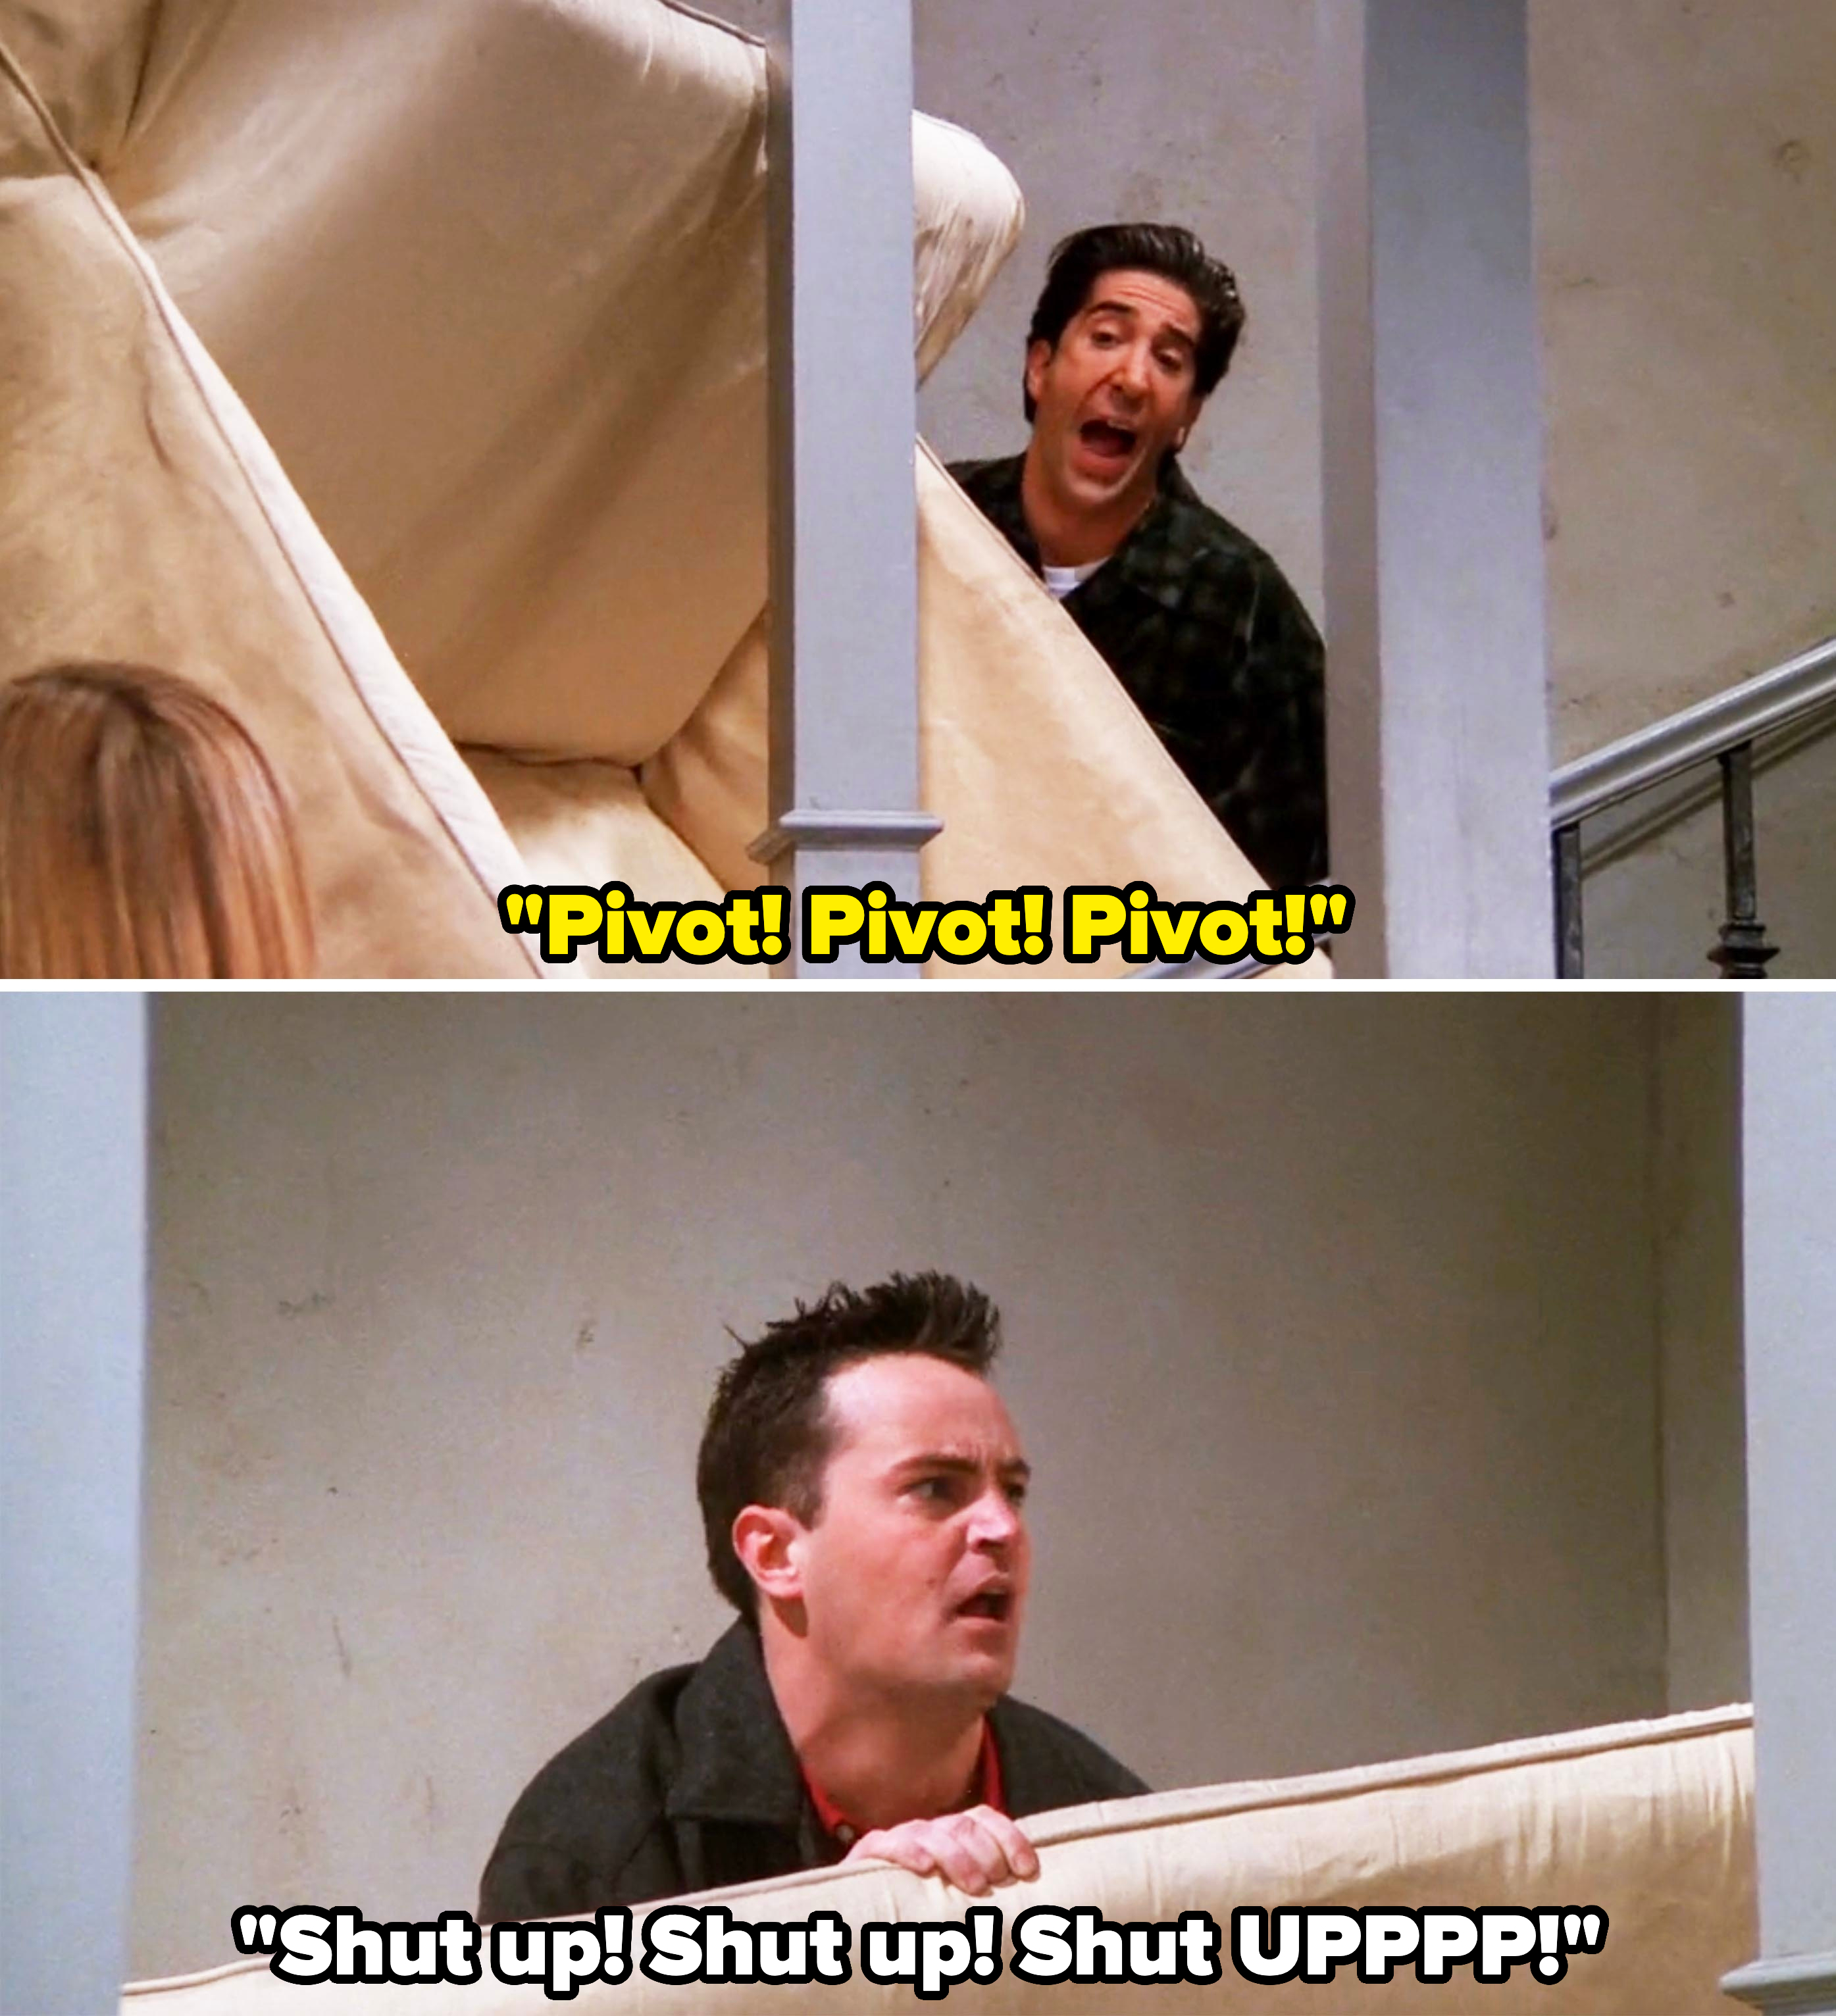 ross yelling pivot as they carry a couch and chandler saying shut up